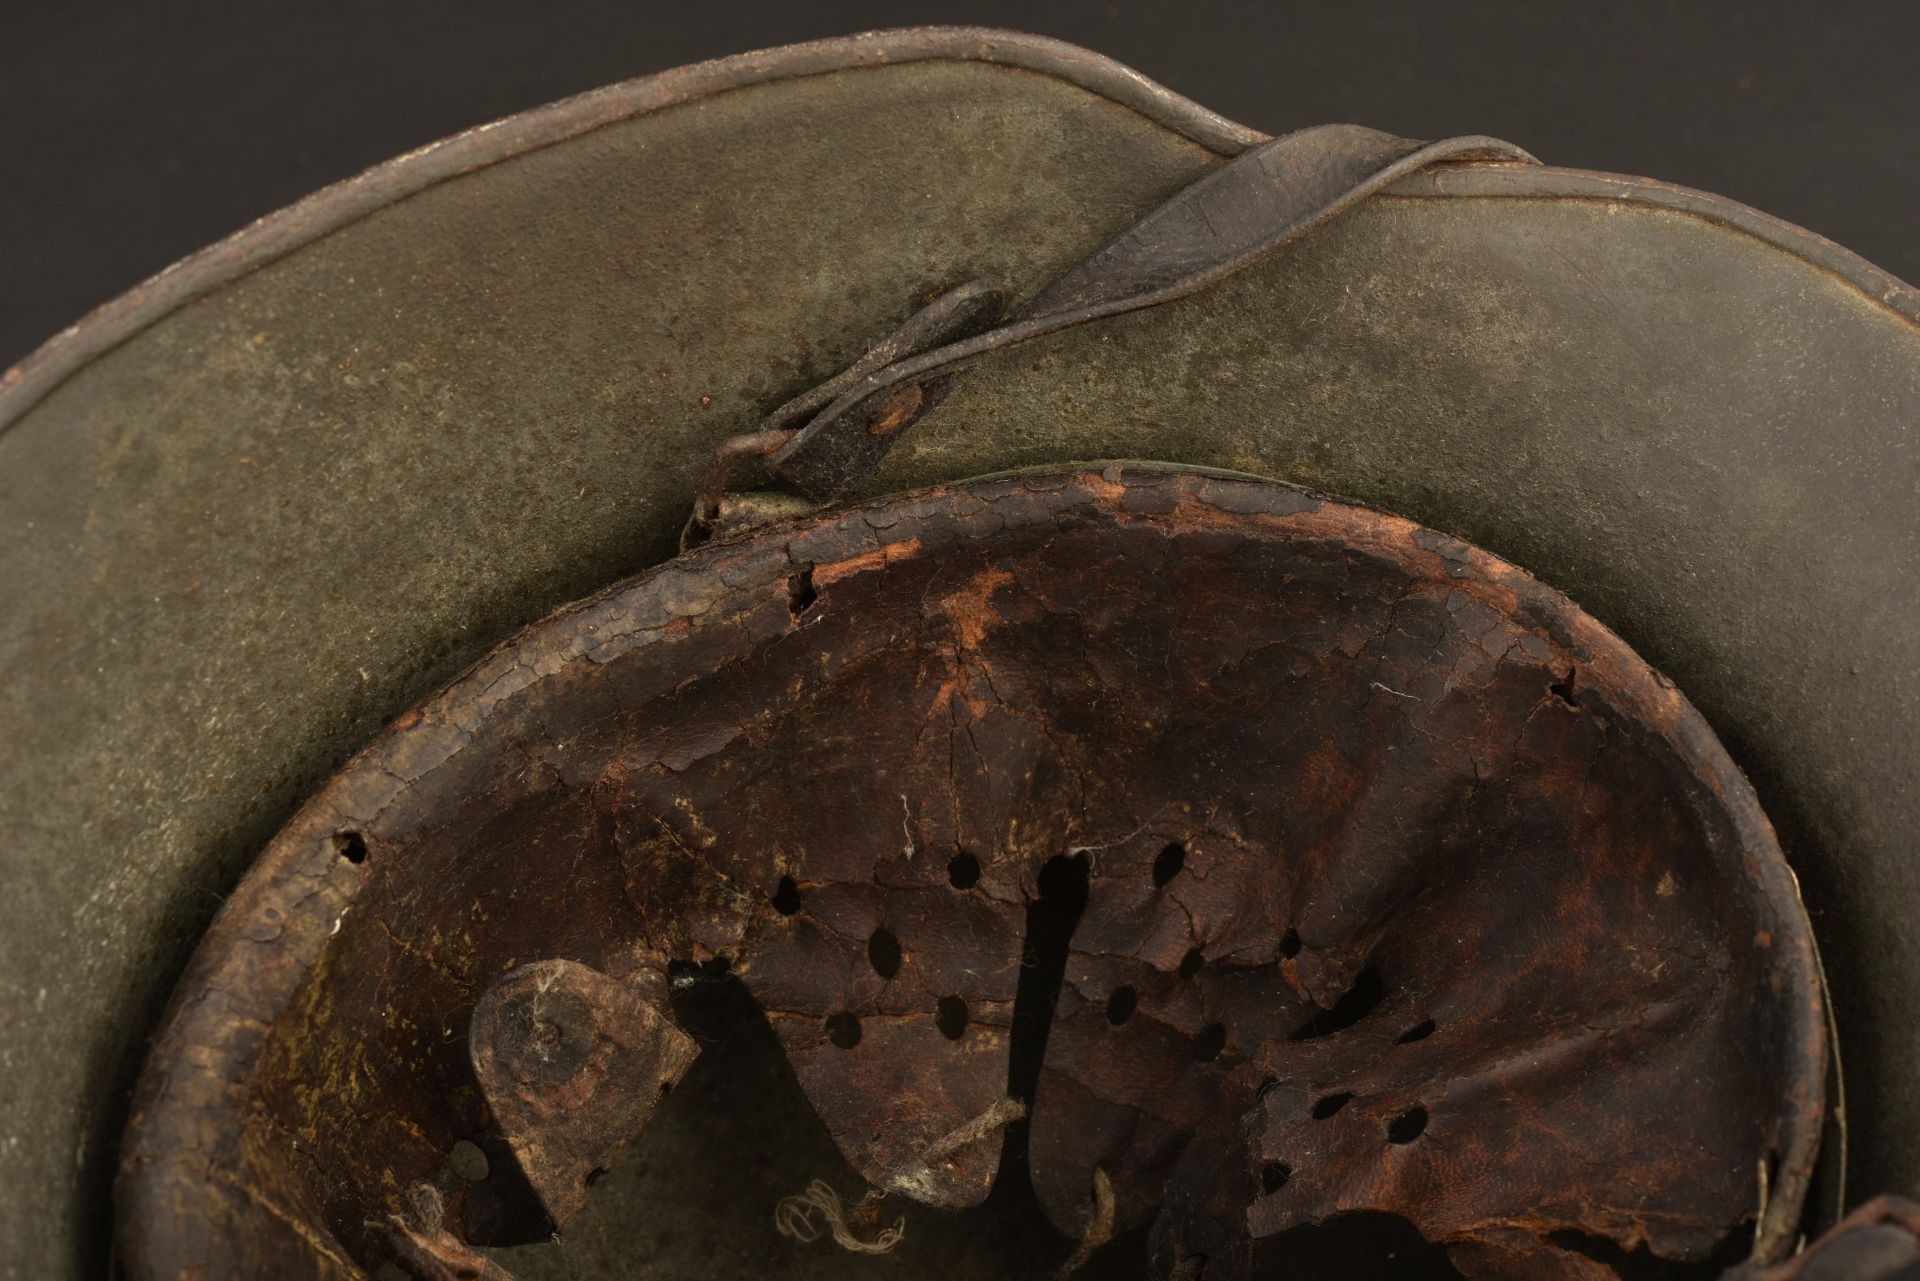 Casque WWI reconditionne. Refurbished WWI helmet. - Image 2 of 9